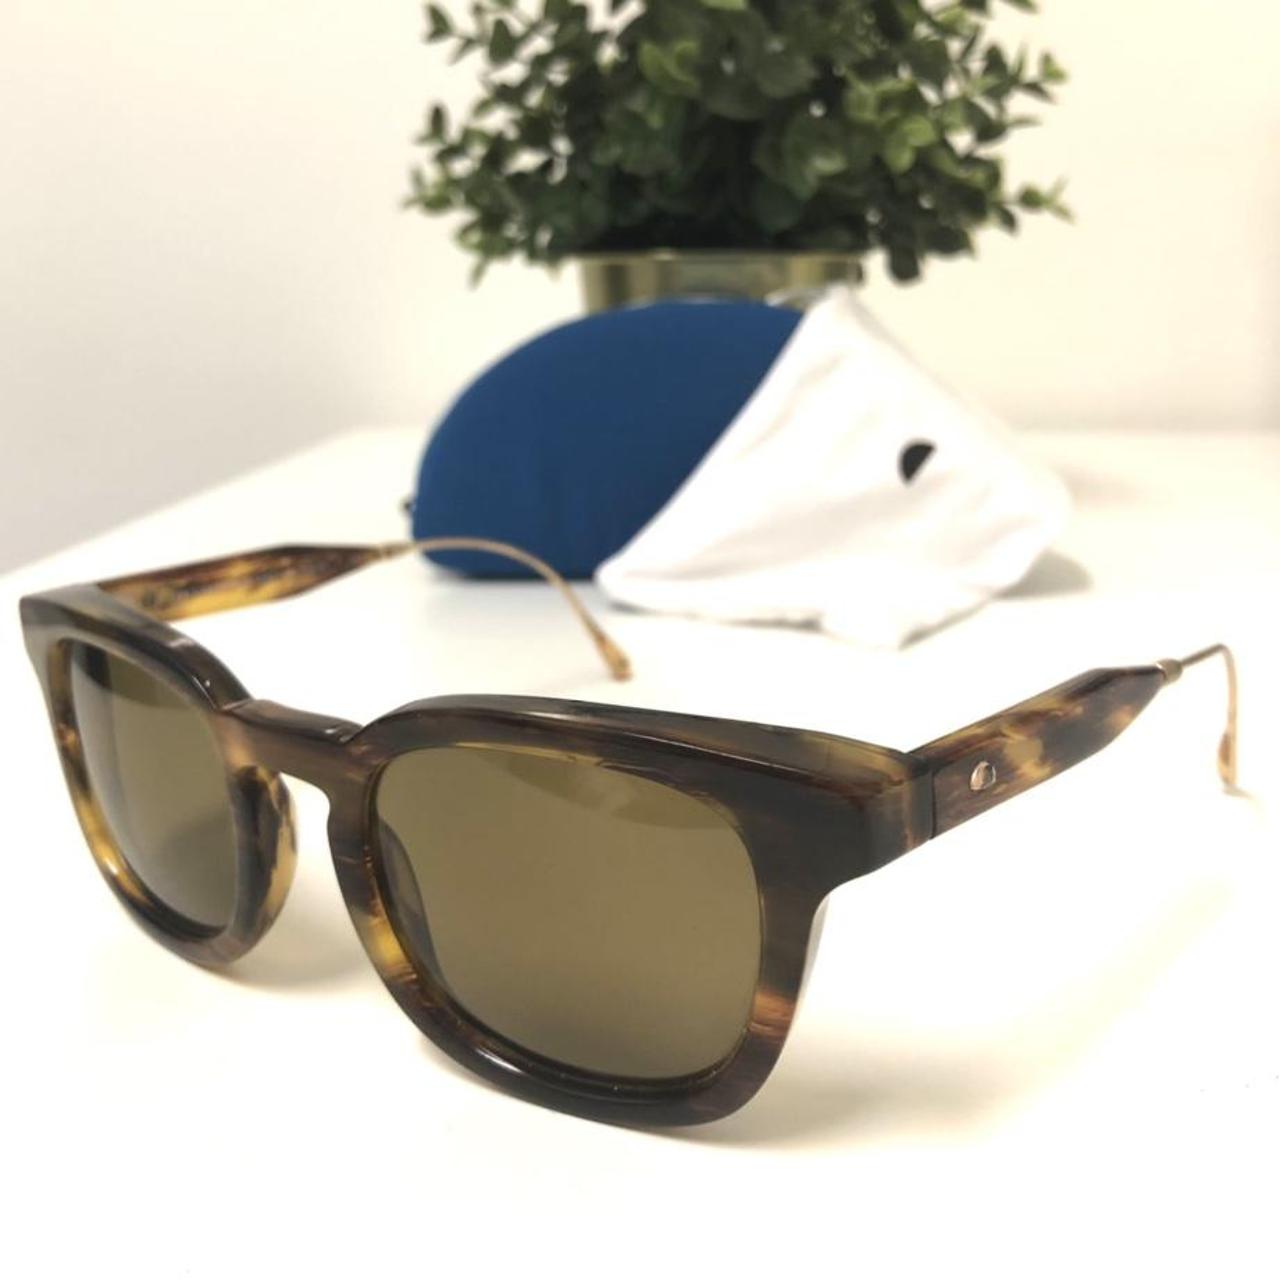 Oliver Peoples Men's Gold and Brown Sunglasses